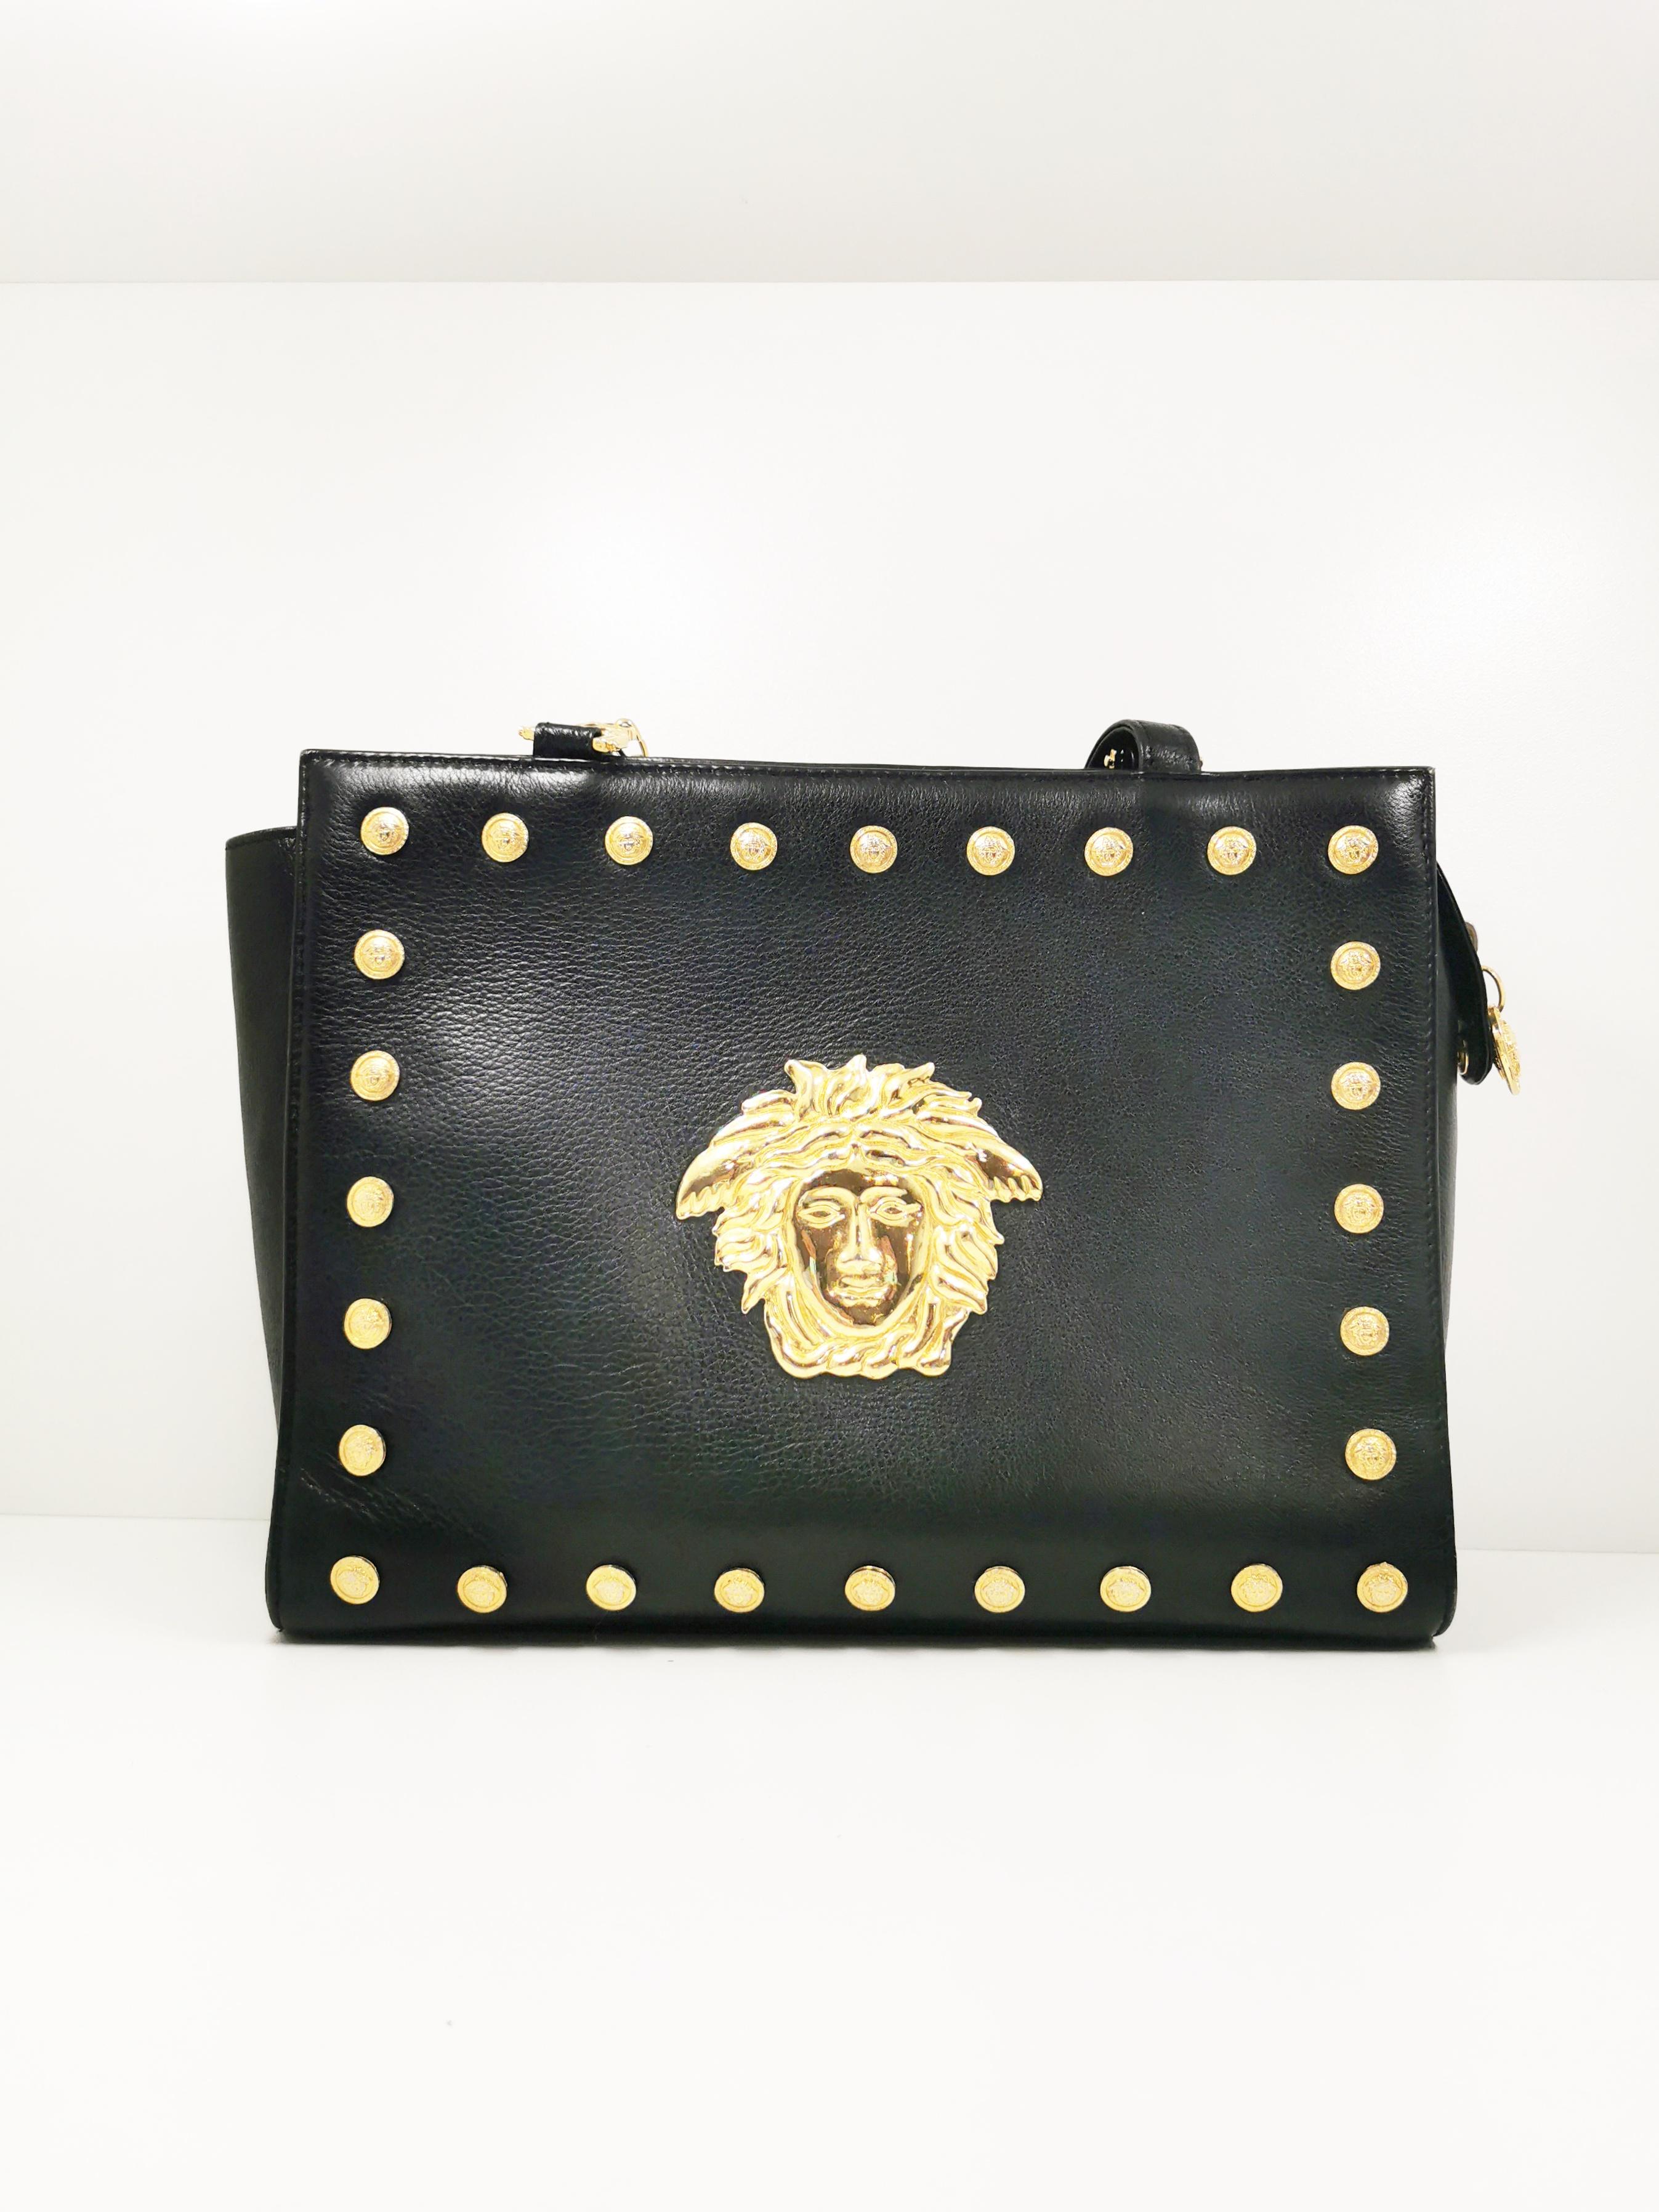 The 1990s Gianni Versace Signature Medusa Head Gold Medallion Shoulder Bag is a true icon of fashion history. This exquisite accessory captures the essence of Gianni Versace's bold and glamorous design aesthetic, making it a coveted collector's item